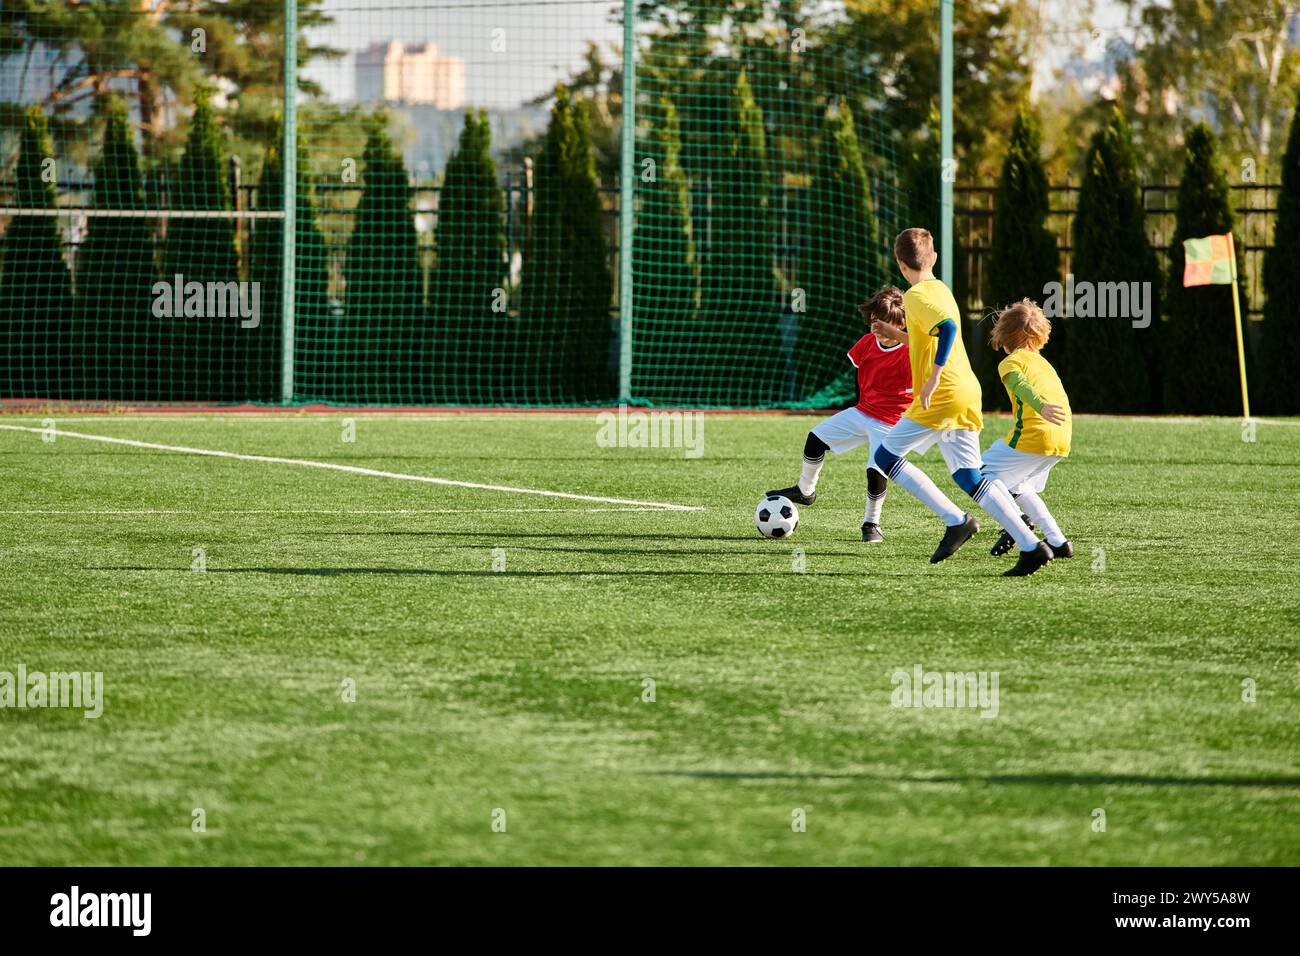 A lively group of young children play a game of soccer, running and kicking the ball across the field with beaming smiles and competitive spirit. Stock Photo